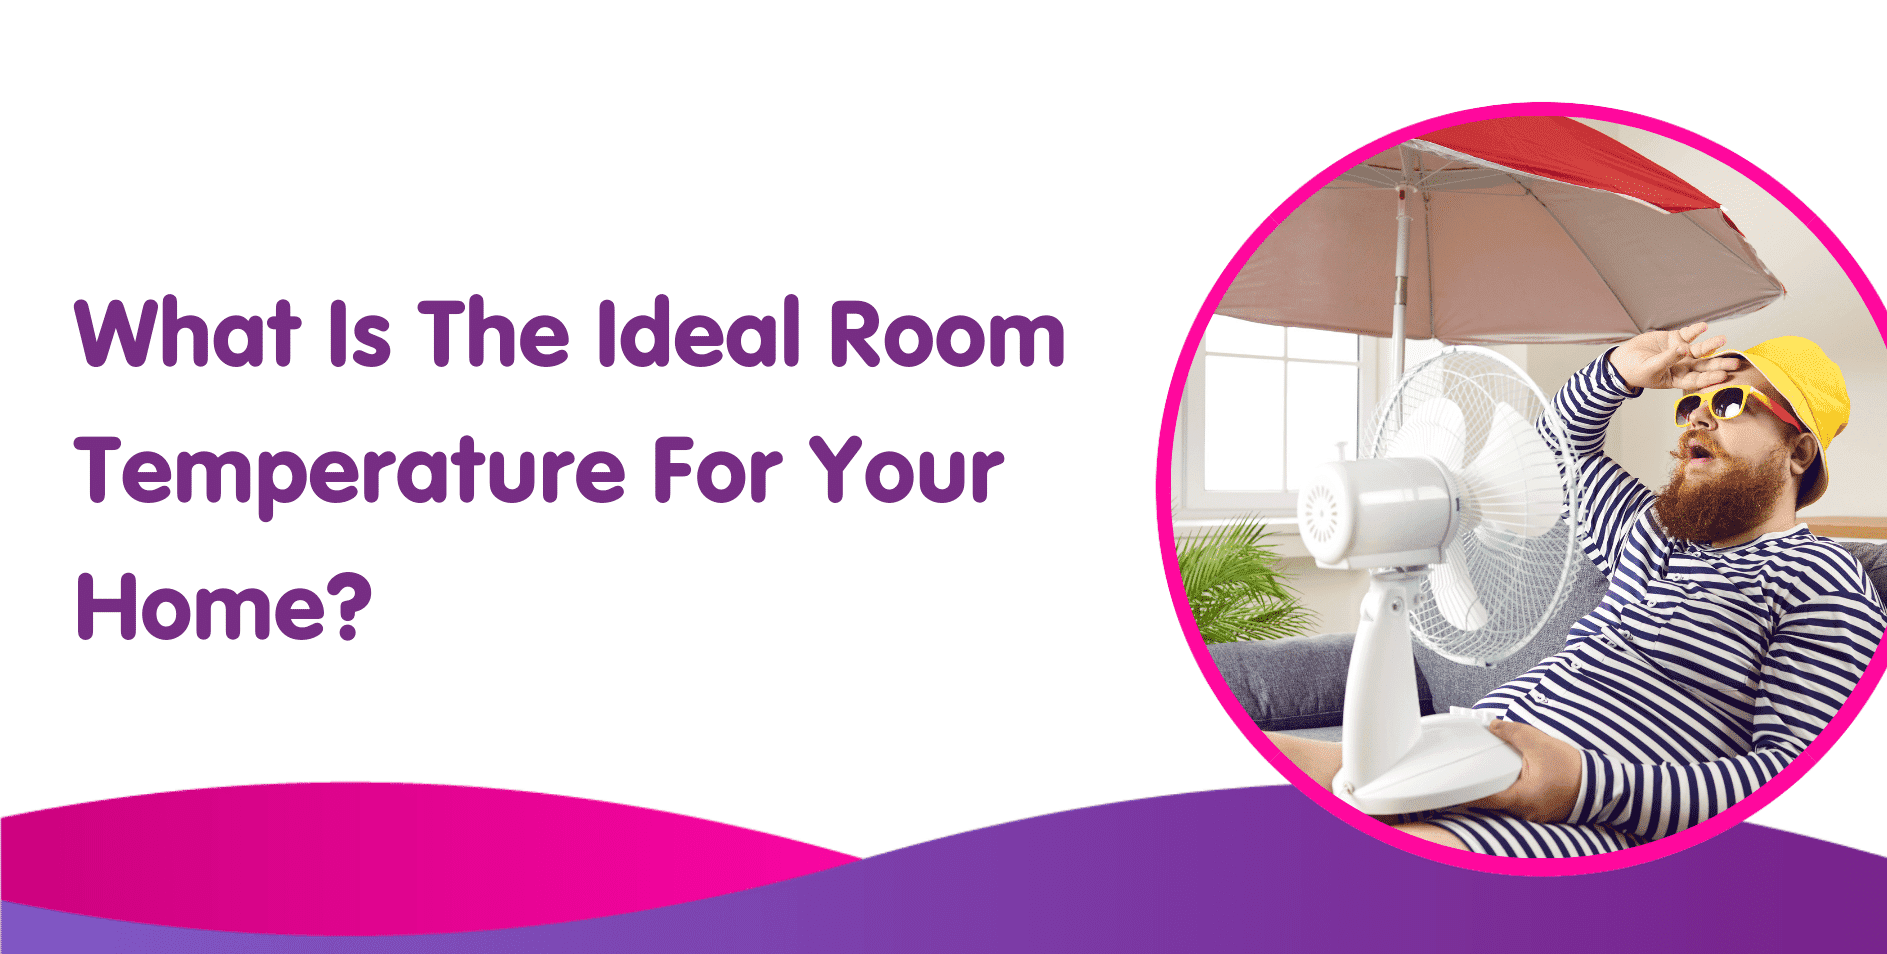 https://www.boilercentral.com/wp-content/uploads/What-Is-The-Ideal-Room-Temperature-For-Your-Home.png